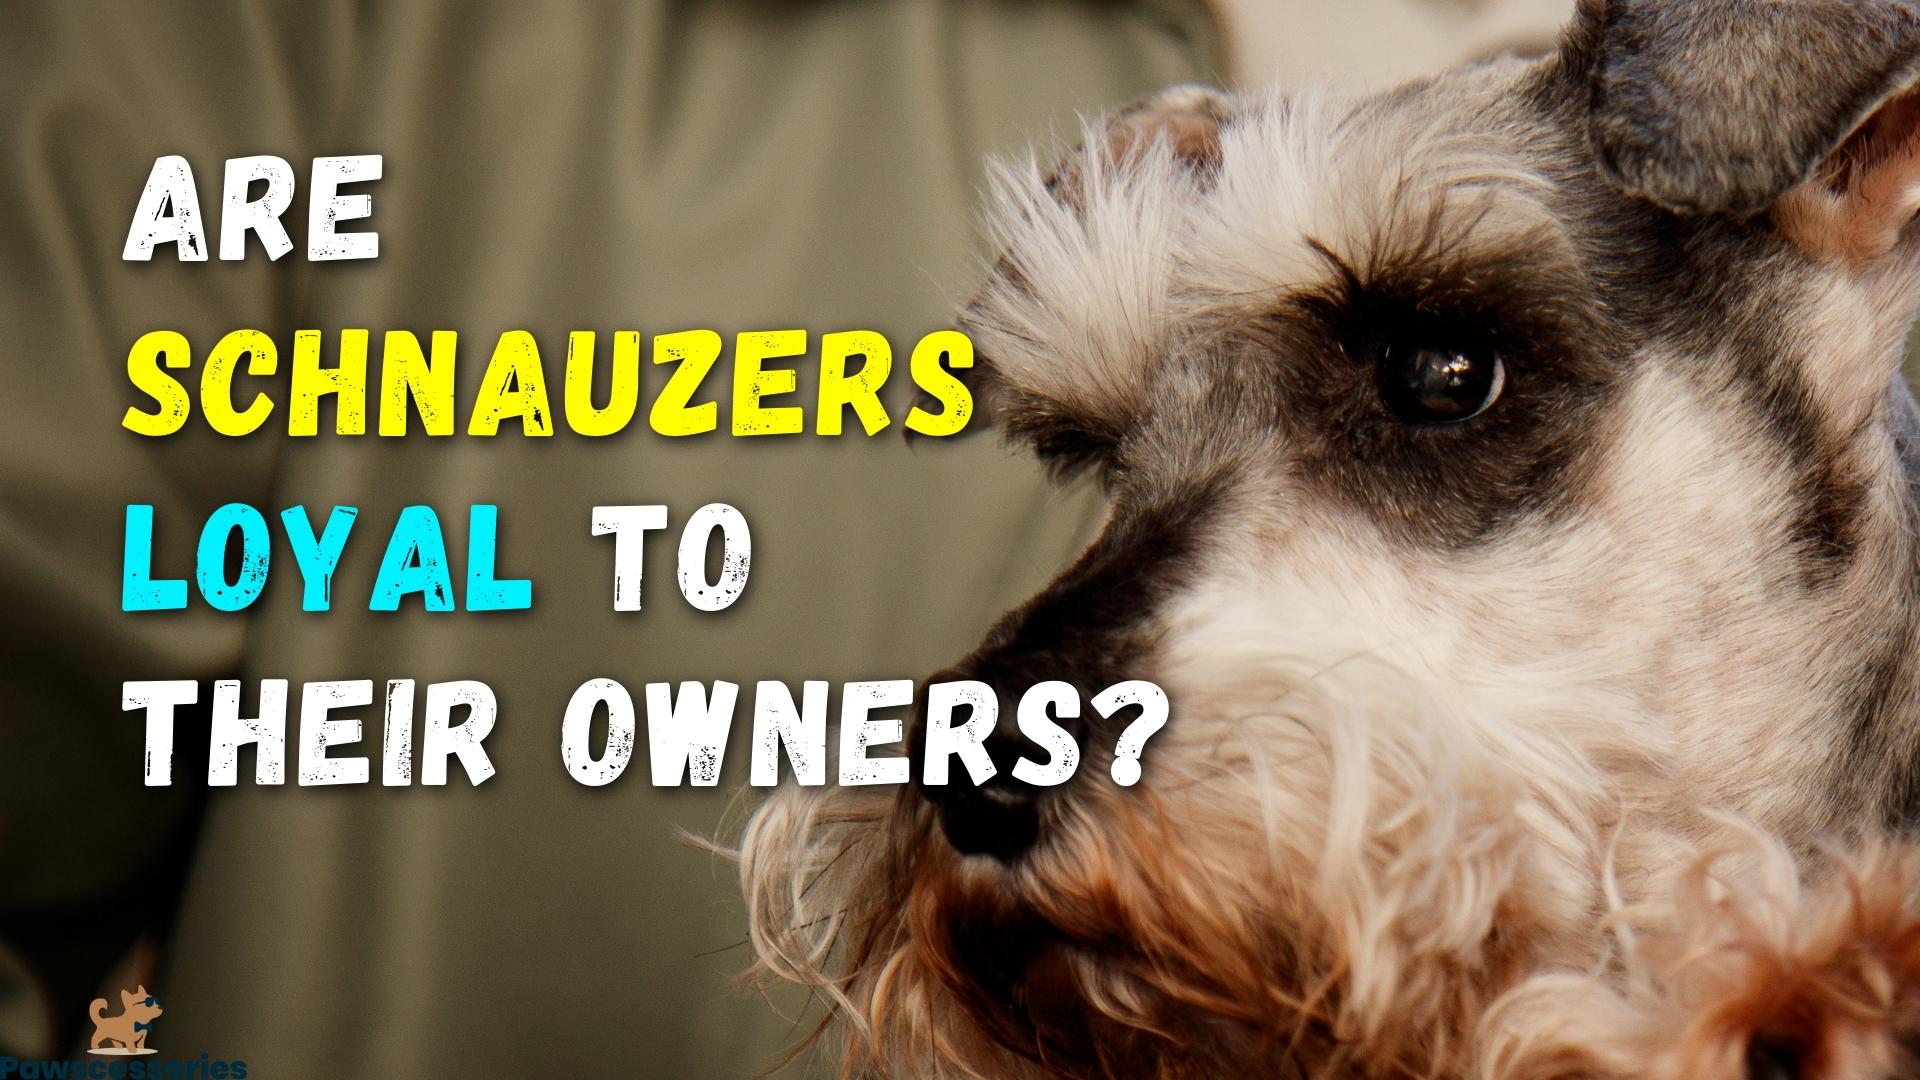 Are Schnauzers Loyal To Their Owners? 9 Facts Revealed